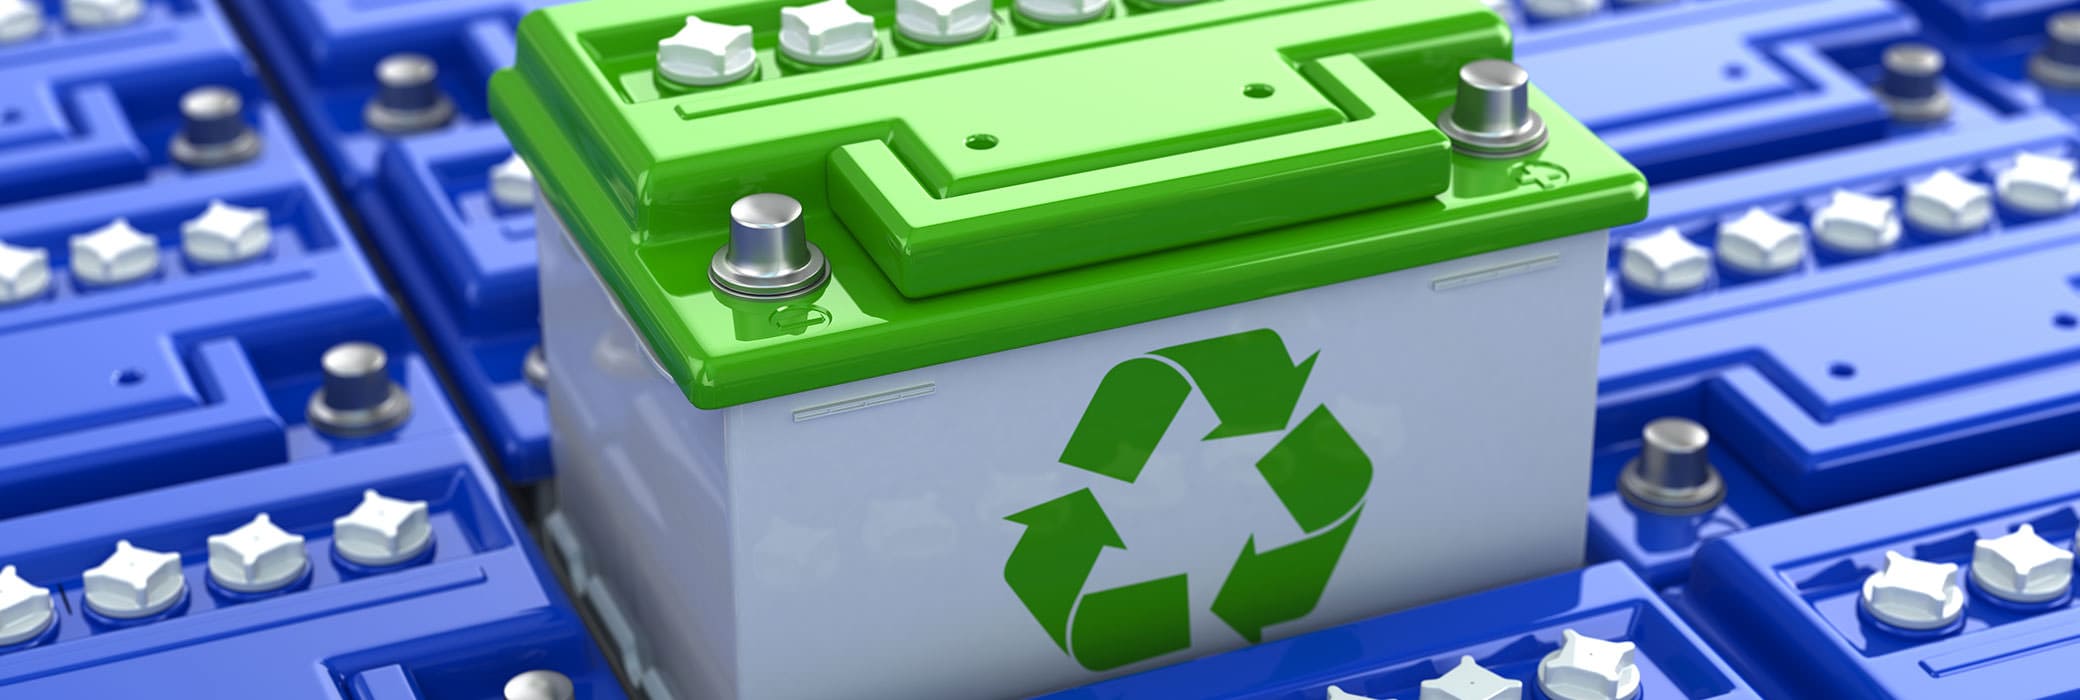 Up to 99% of your car battery is recyclable and can be used to make new batteries and other products.